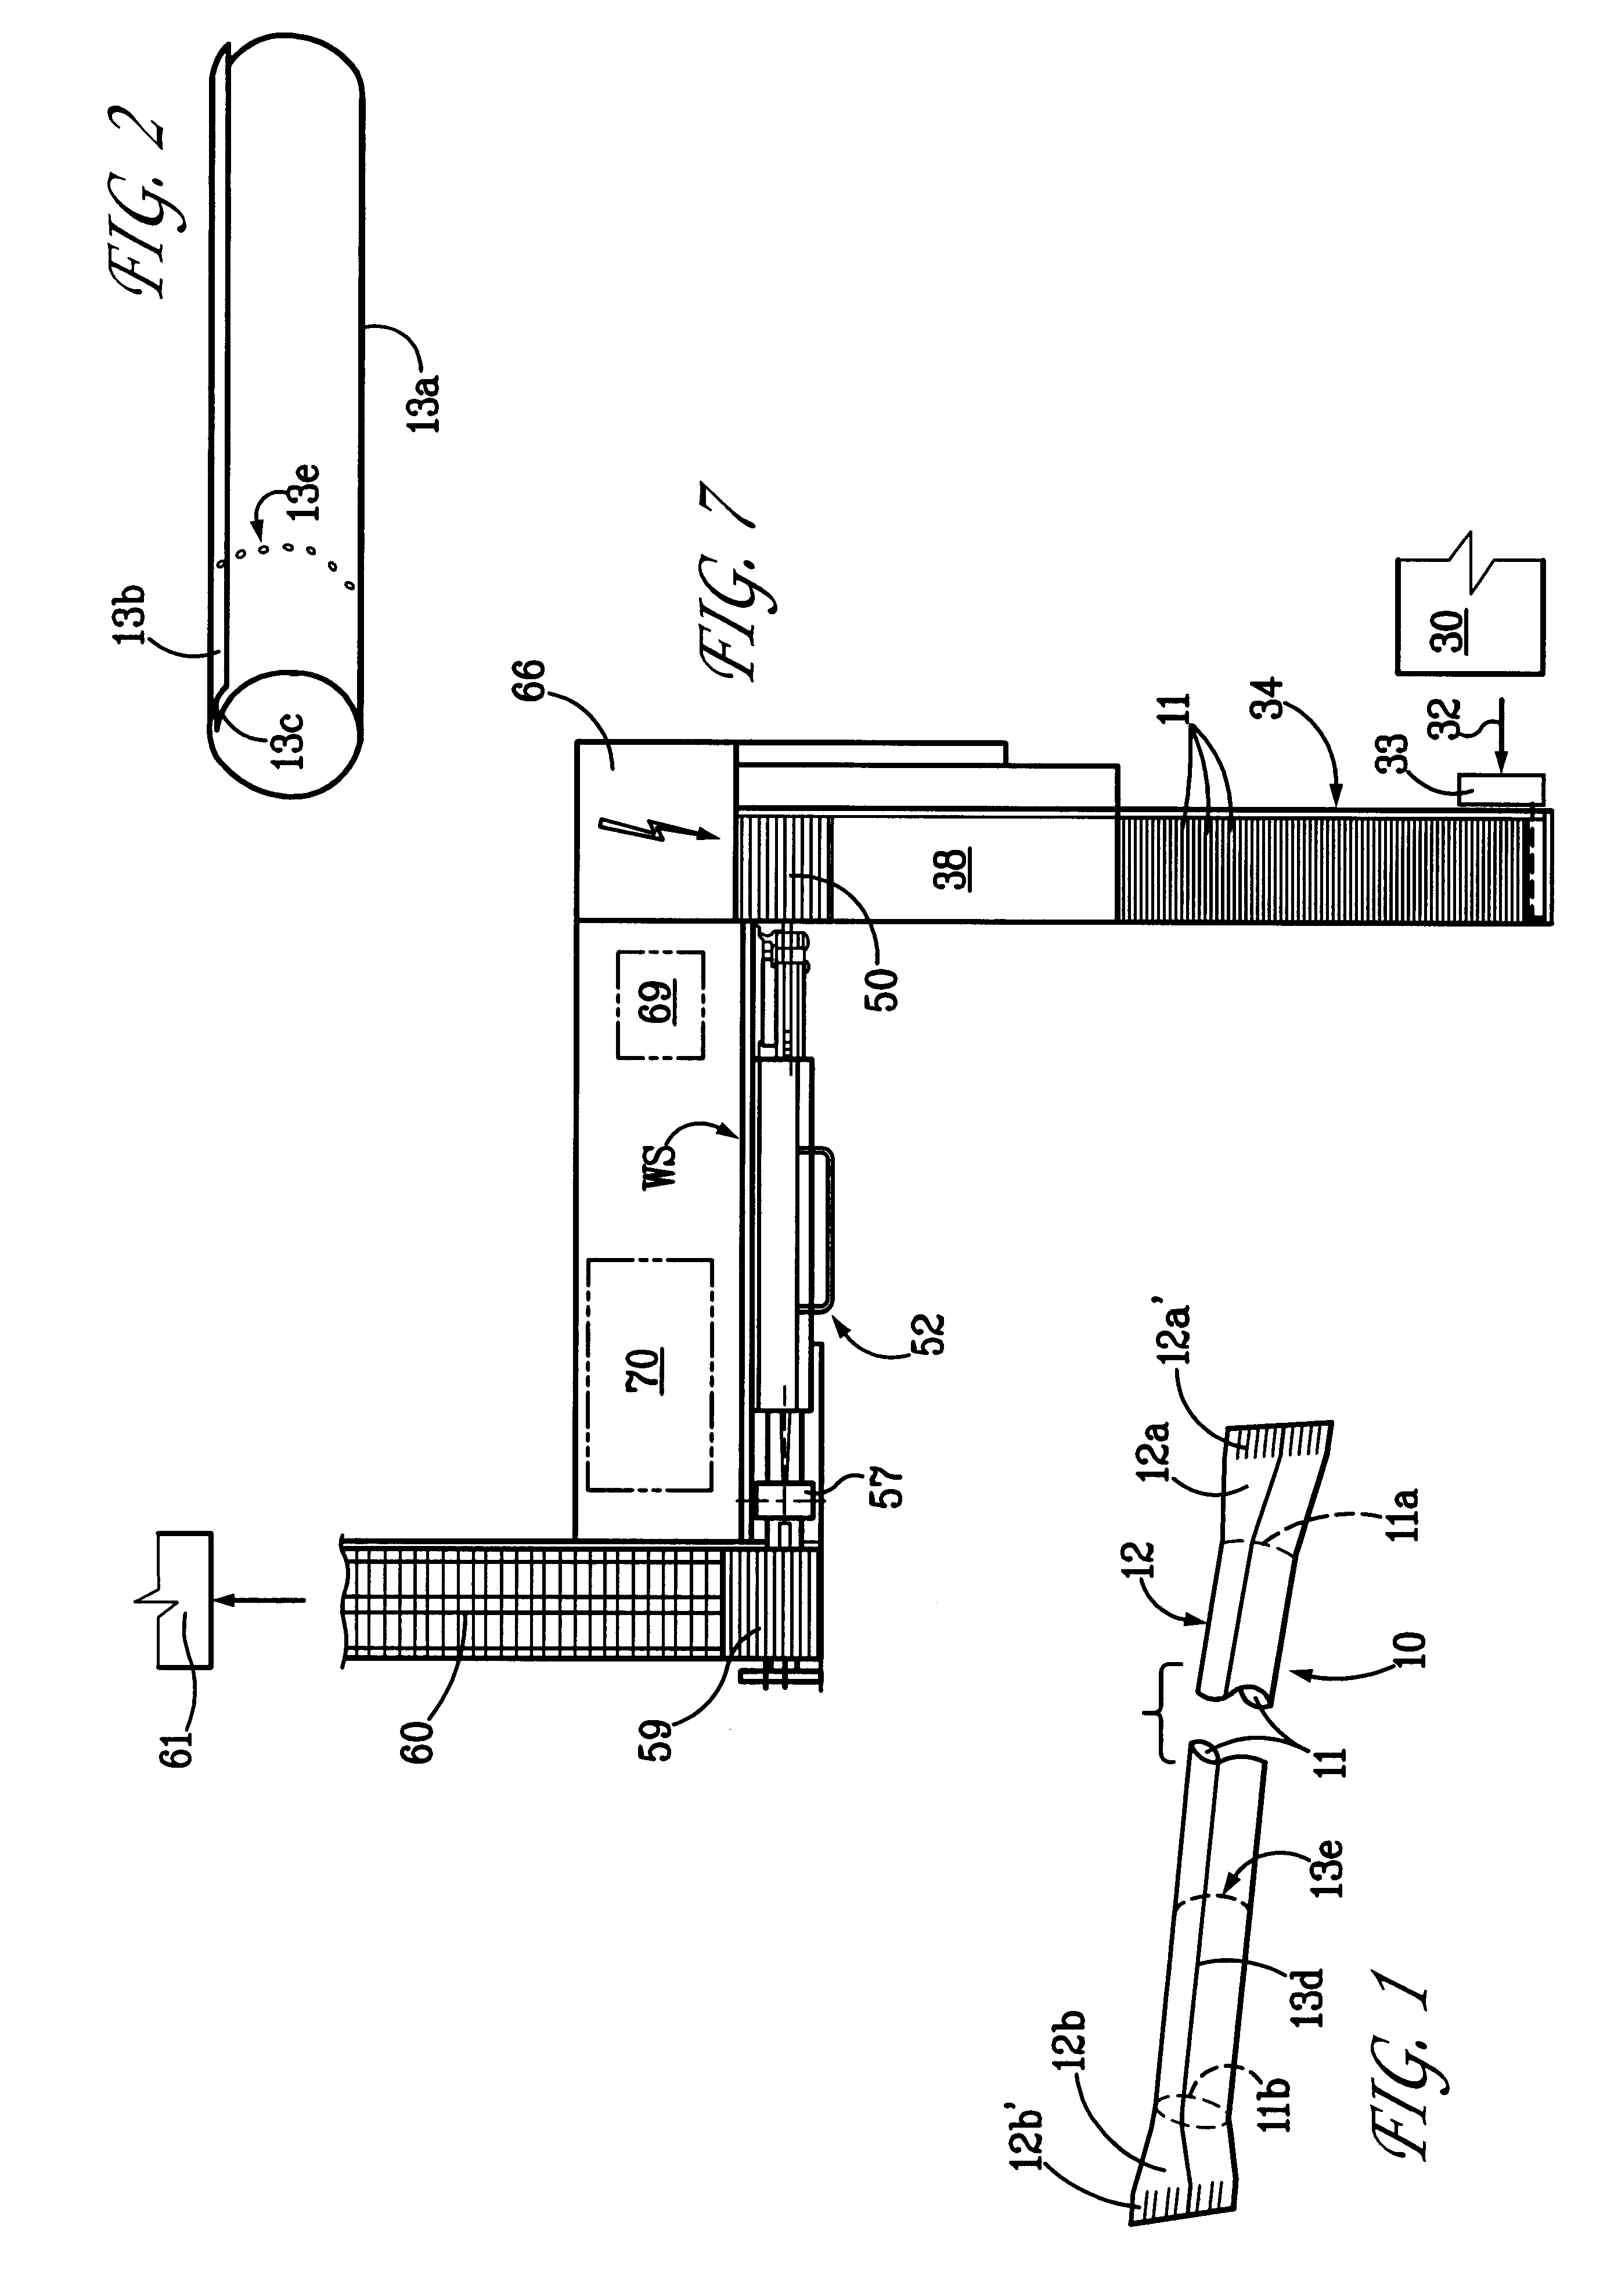 Apparatus for wrapping drinking straws